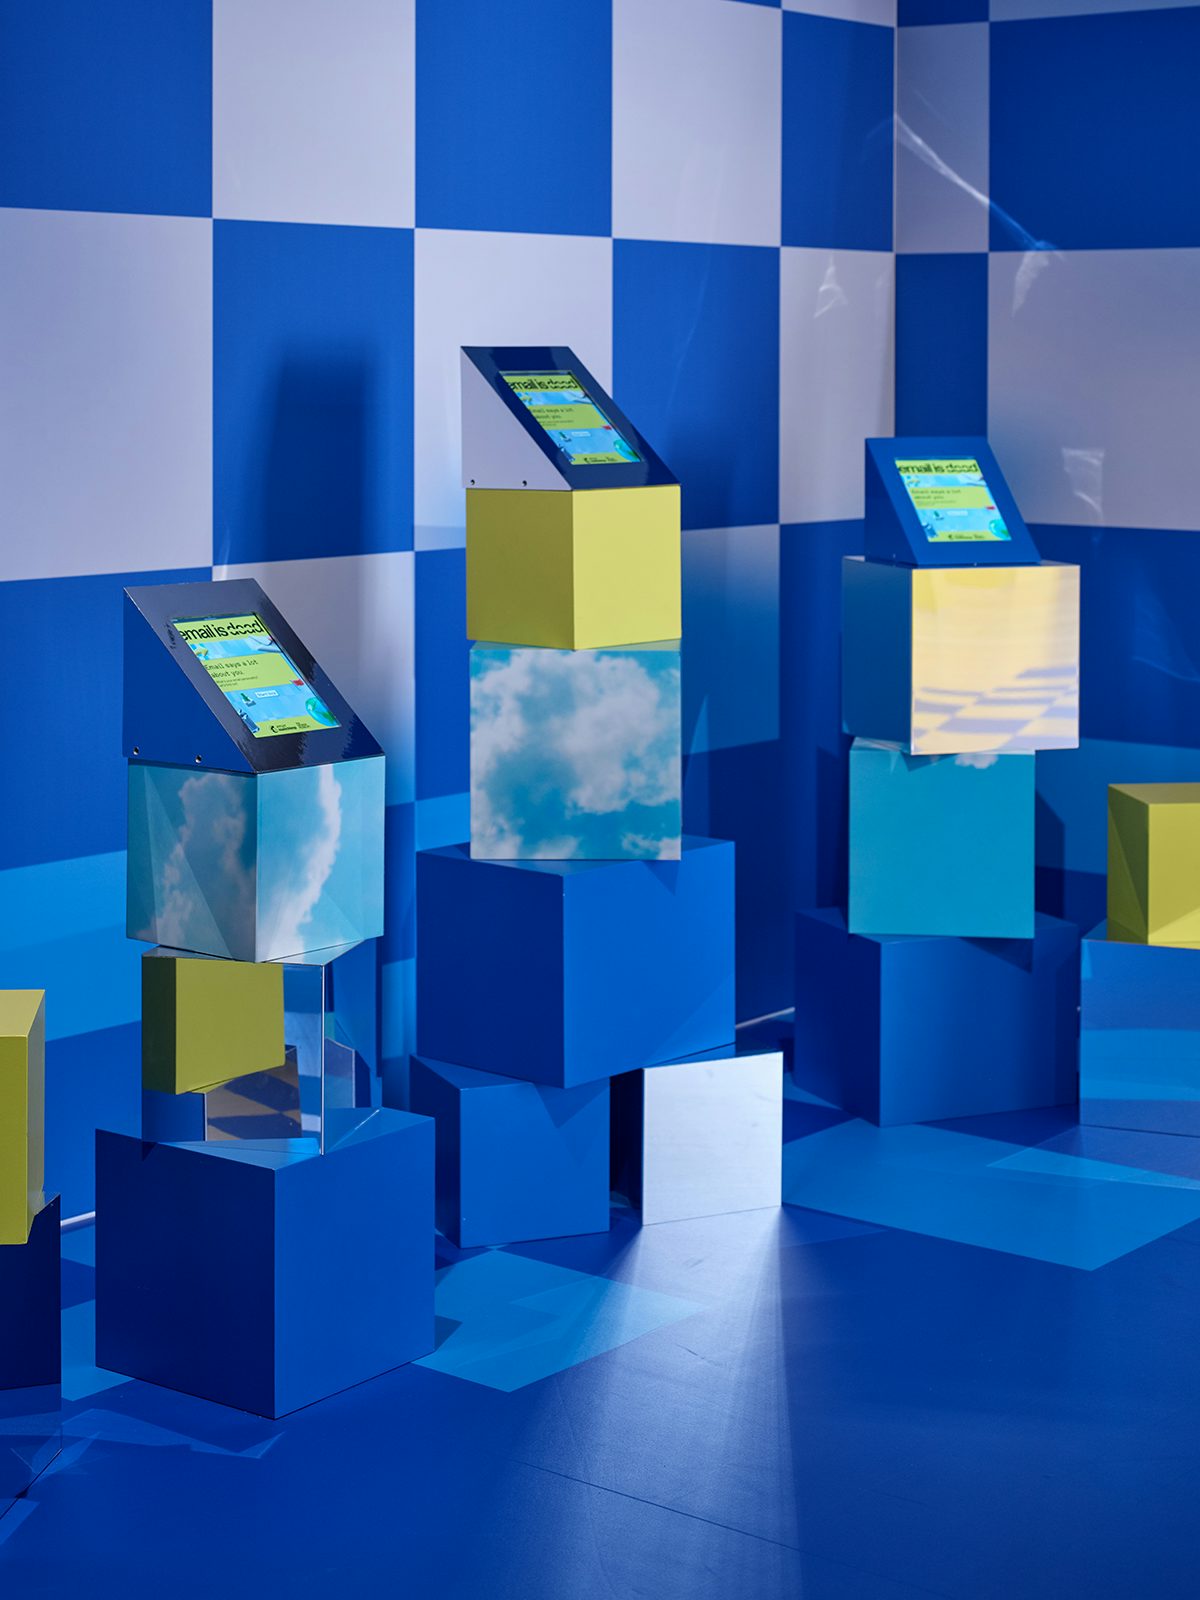 Image shows an install at Mailchimp's Email is Dead exhibition at the Design Museum, featuring blue and yellow blocks stacked unevenly with three touch screen devices arranged on top of each stack